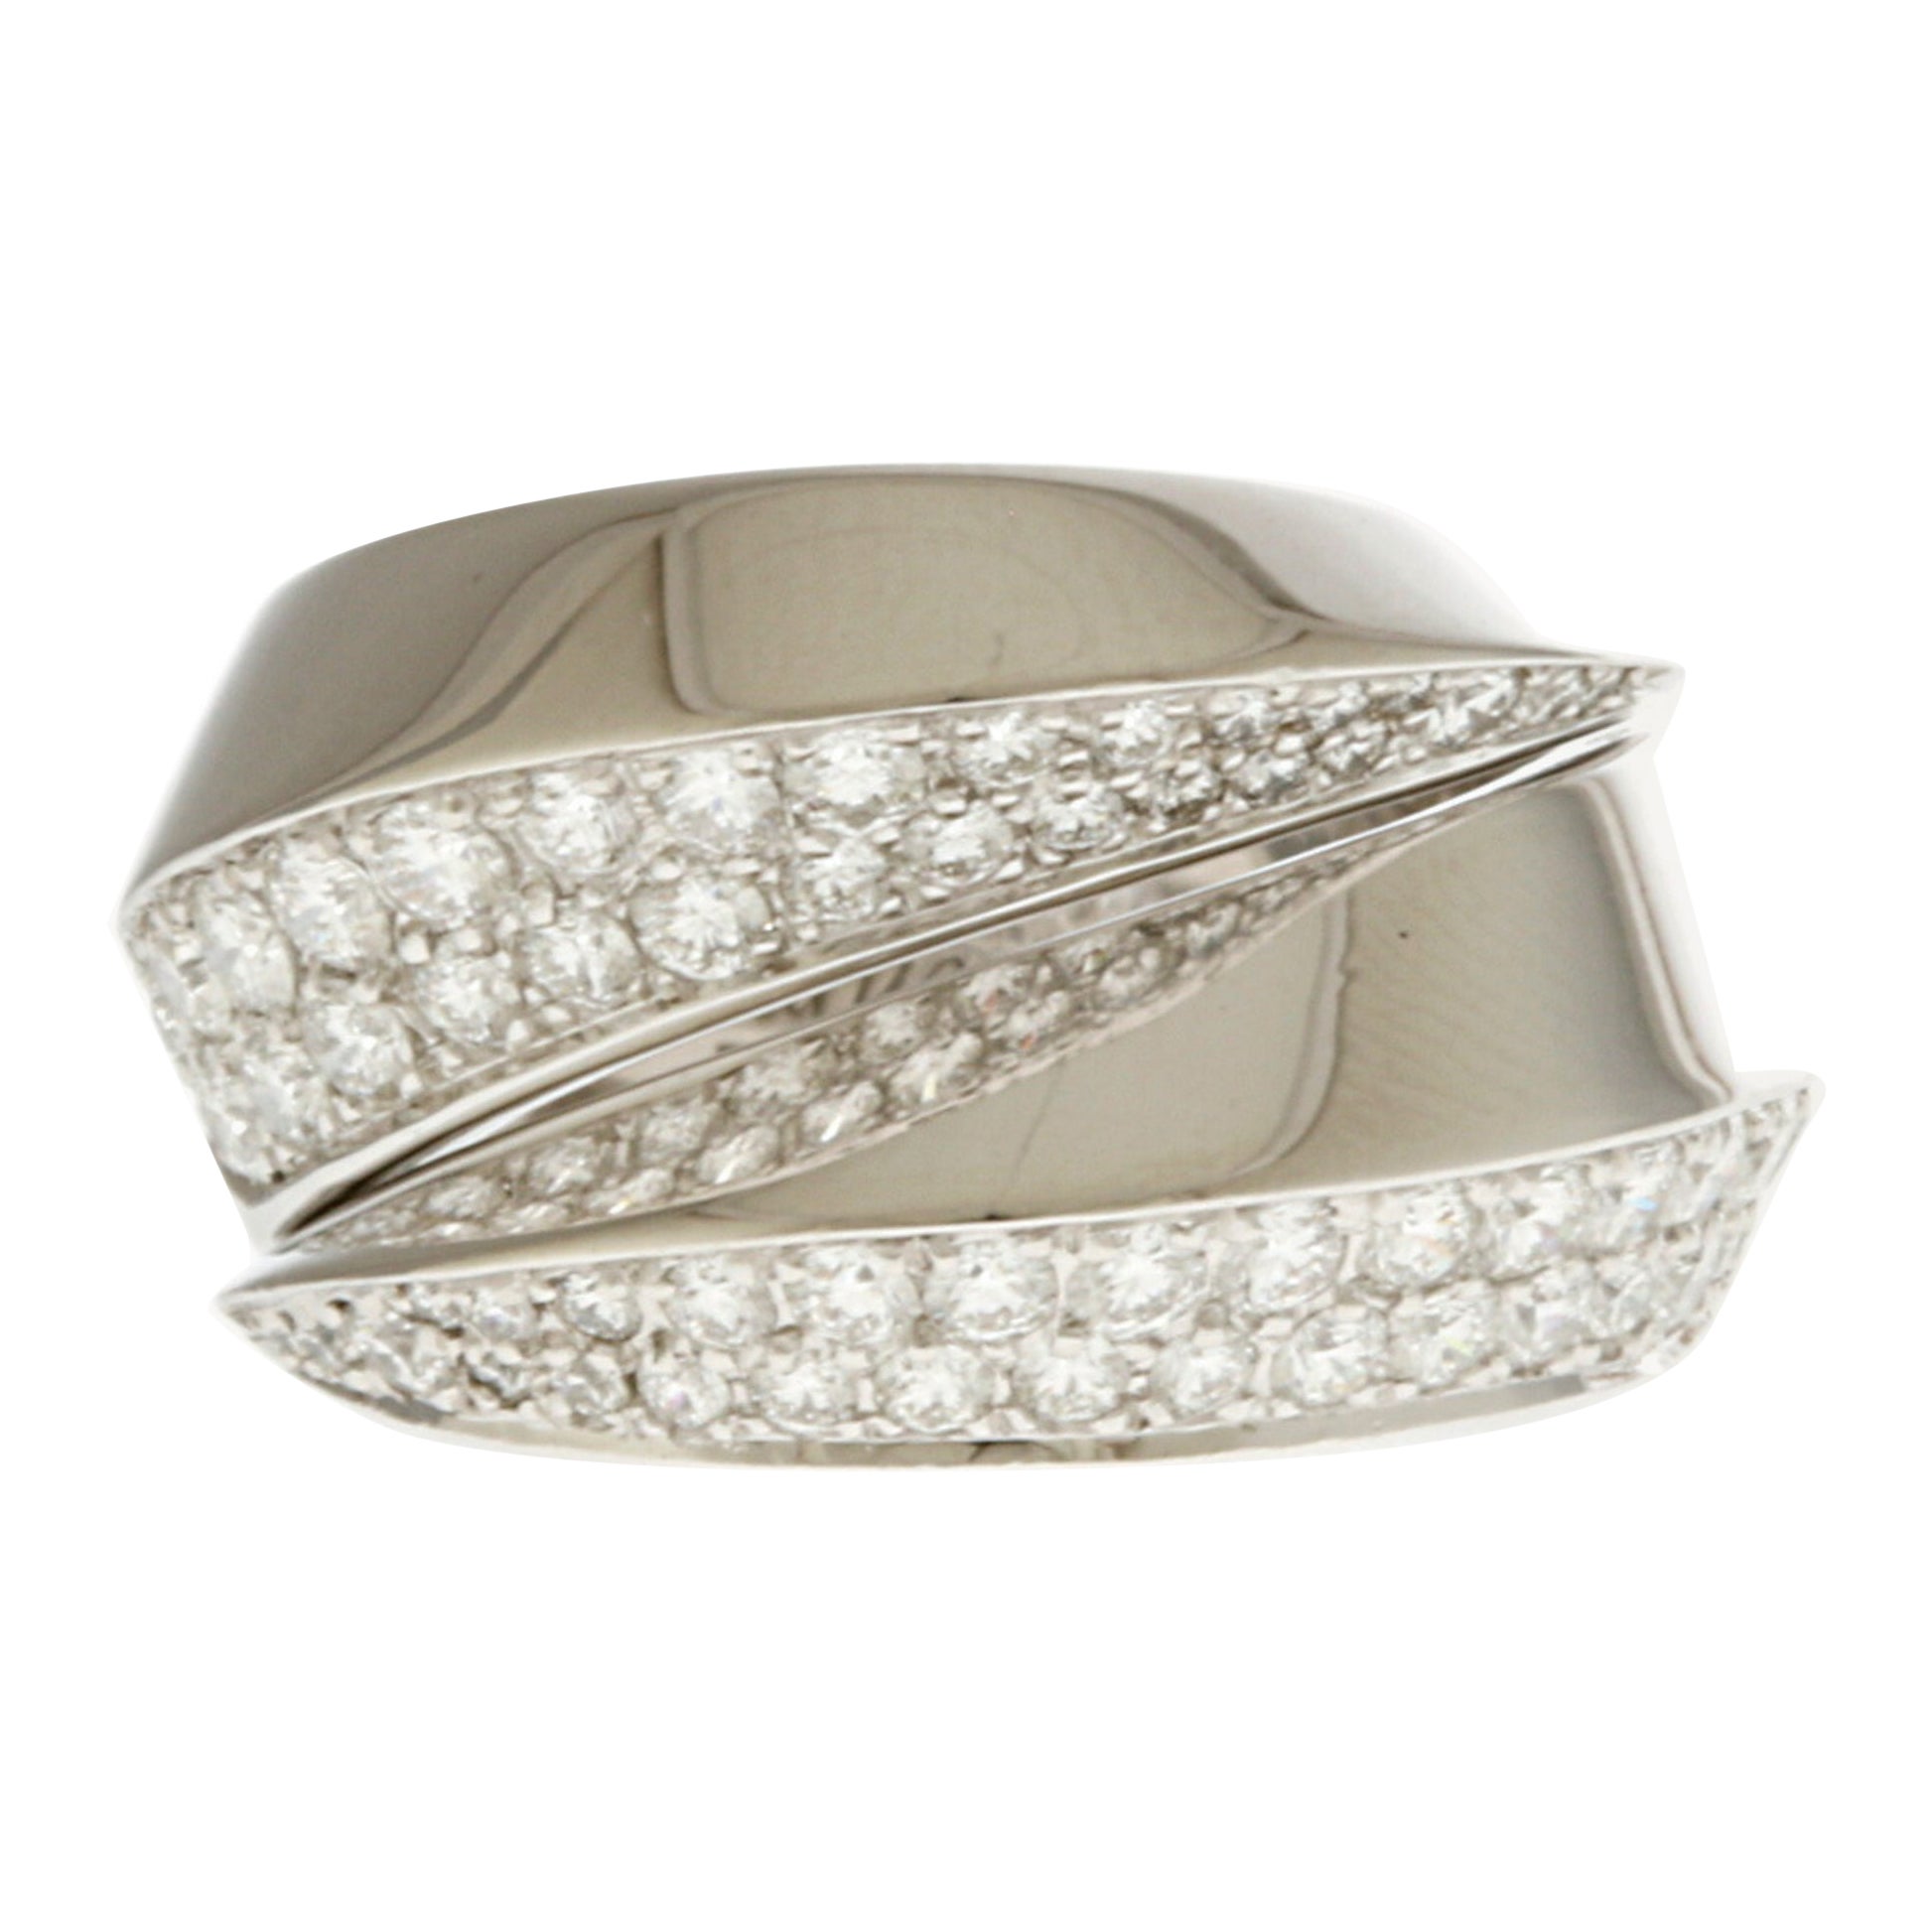 Cartier Panthere Griff Diamond Ring in 18K White Gold For Sale